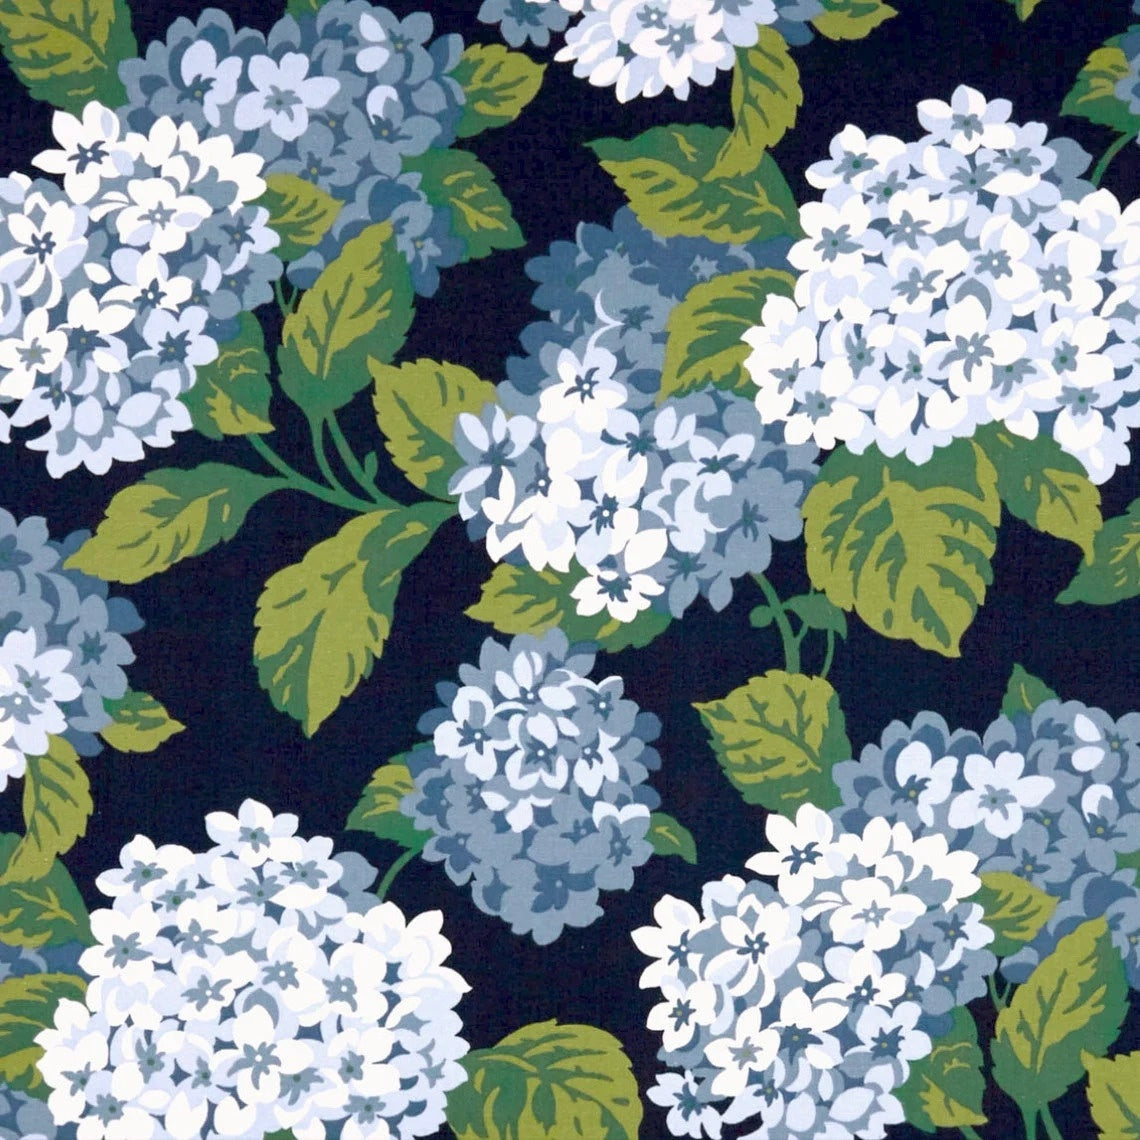 shower curtain in summerwind navy blue hydrangea floral, large scale